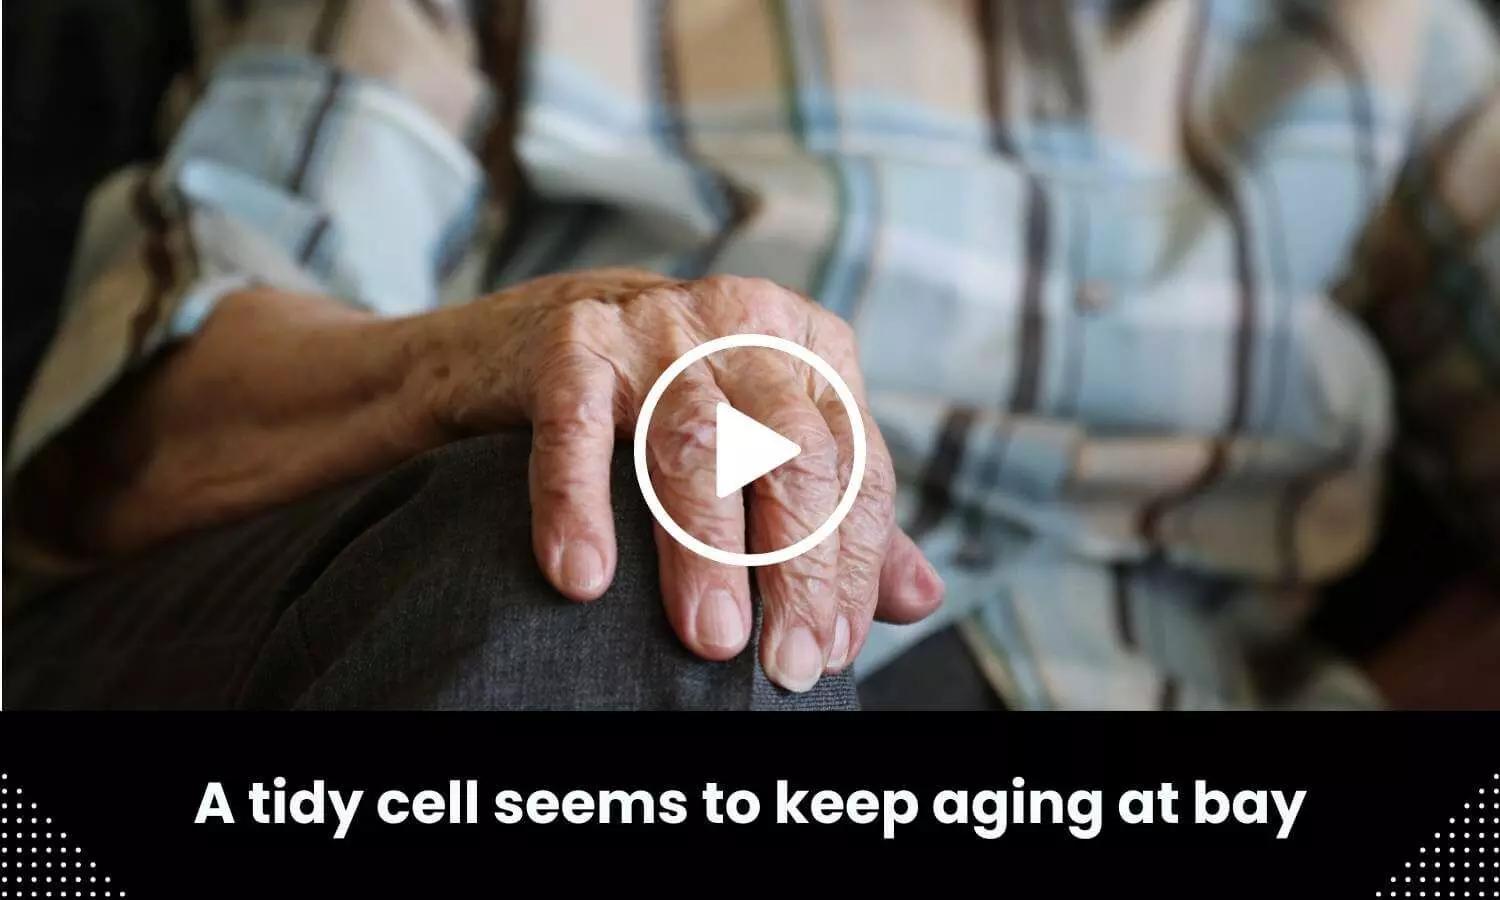 A tidy cell seems to keep aging at bay